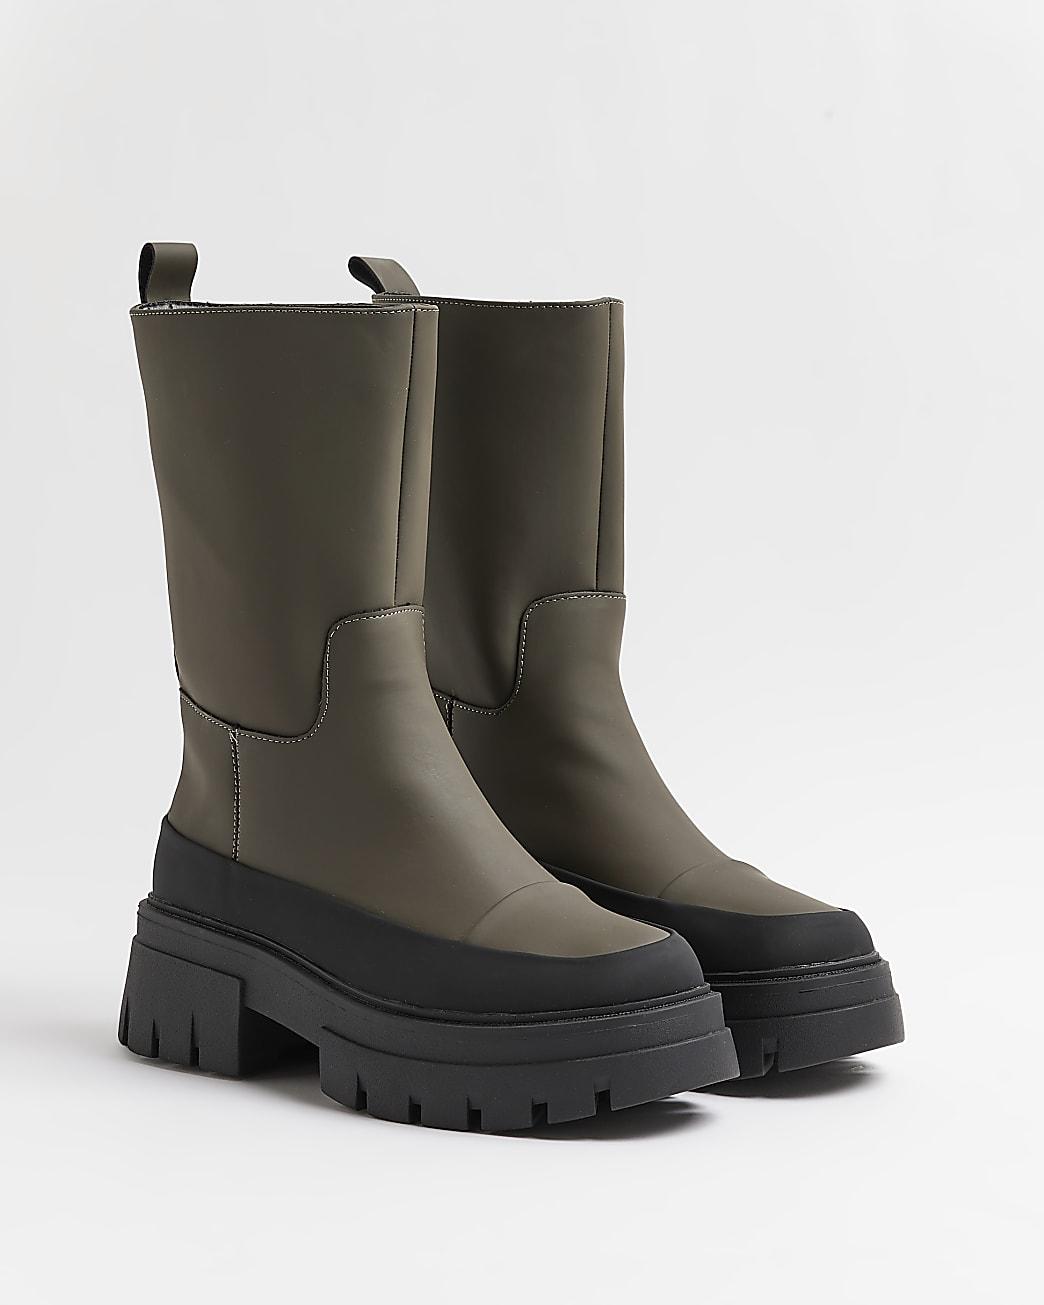 River Island Khaki Chunky Ankle Boots in Black | Lyst